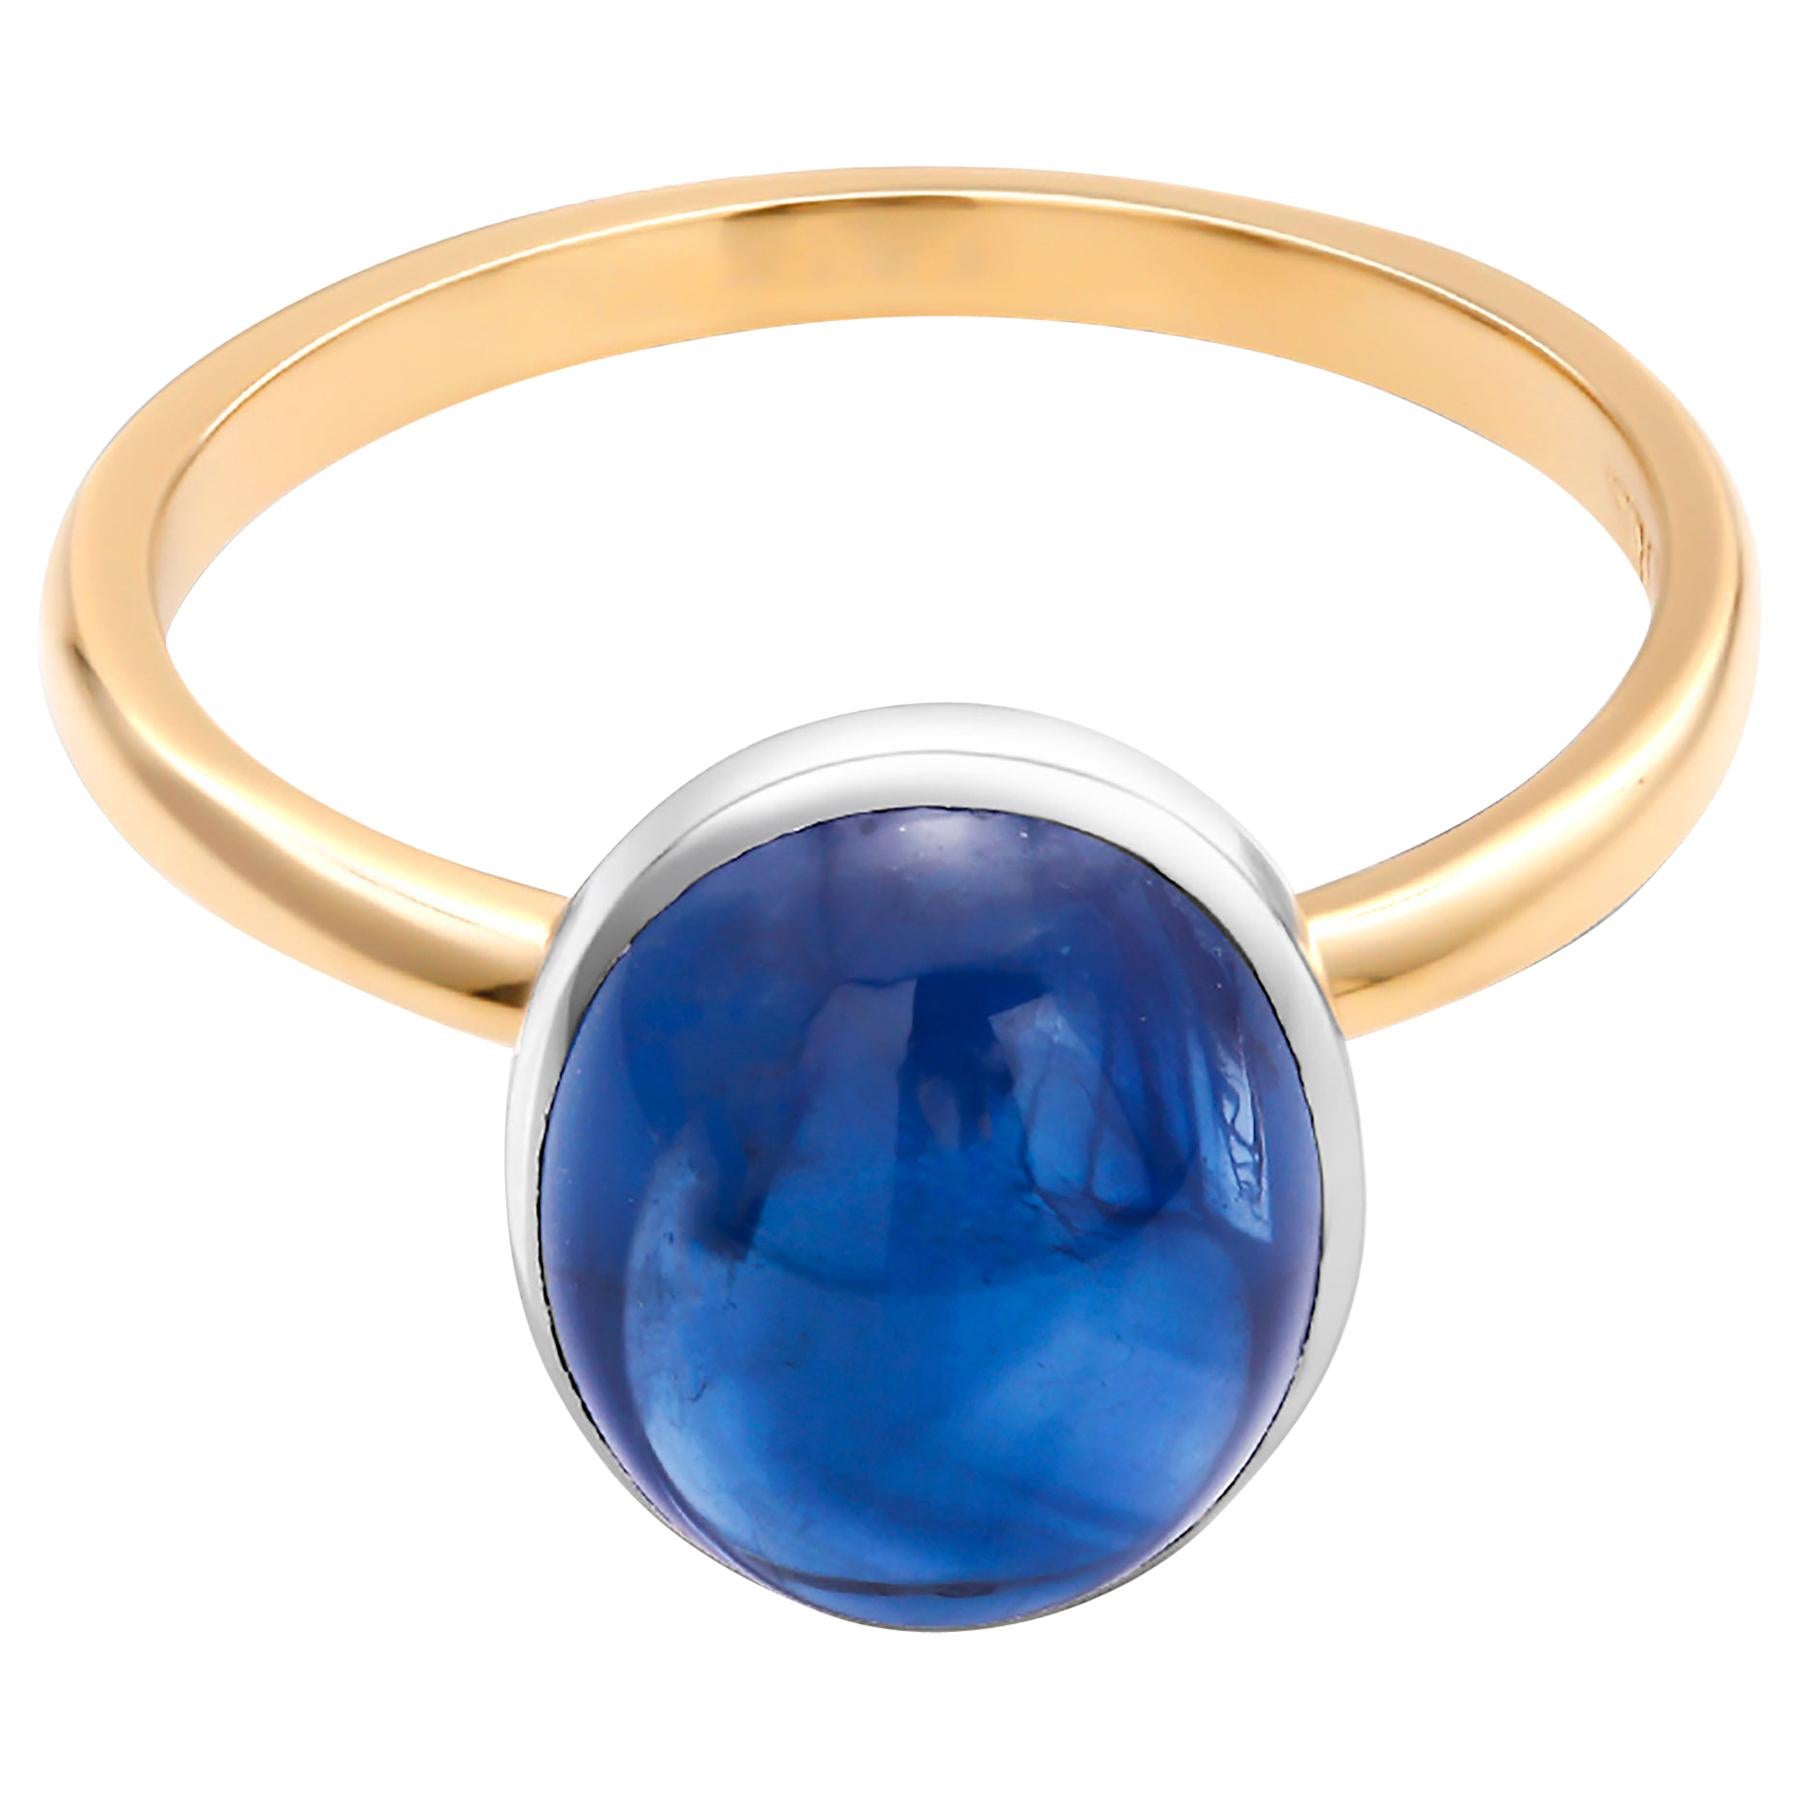 Eighteen karat white and yellow gold cocktail ring
Ceylon cabochon sapphire weighing  4 carat                                                                       
Ring size 6 In Stock
Ring can be resized 
New Ring
Handmade in USA
Our design team